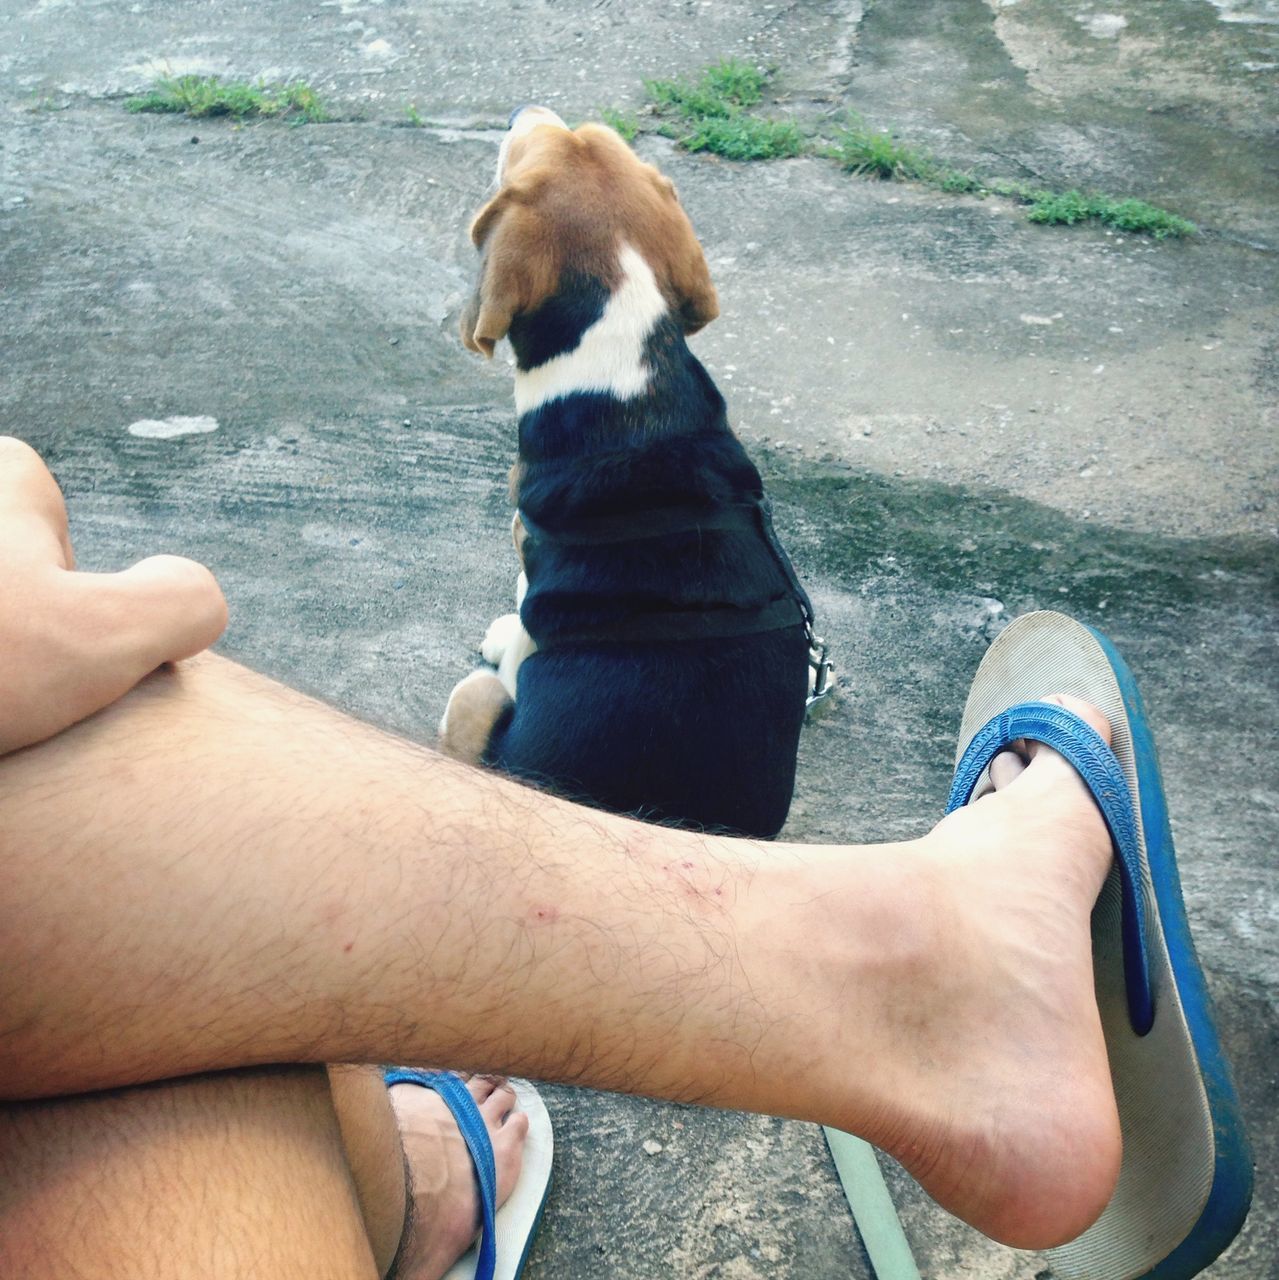 personal perspective, low section, person, part of, lifestyles, pets, leisure activity, dog, domestic animals, men, one animal, animal themes, mammal, human foot, cropped, unrecognizable person